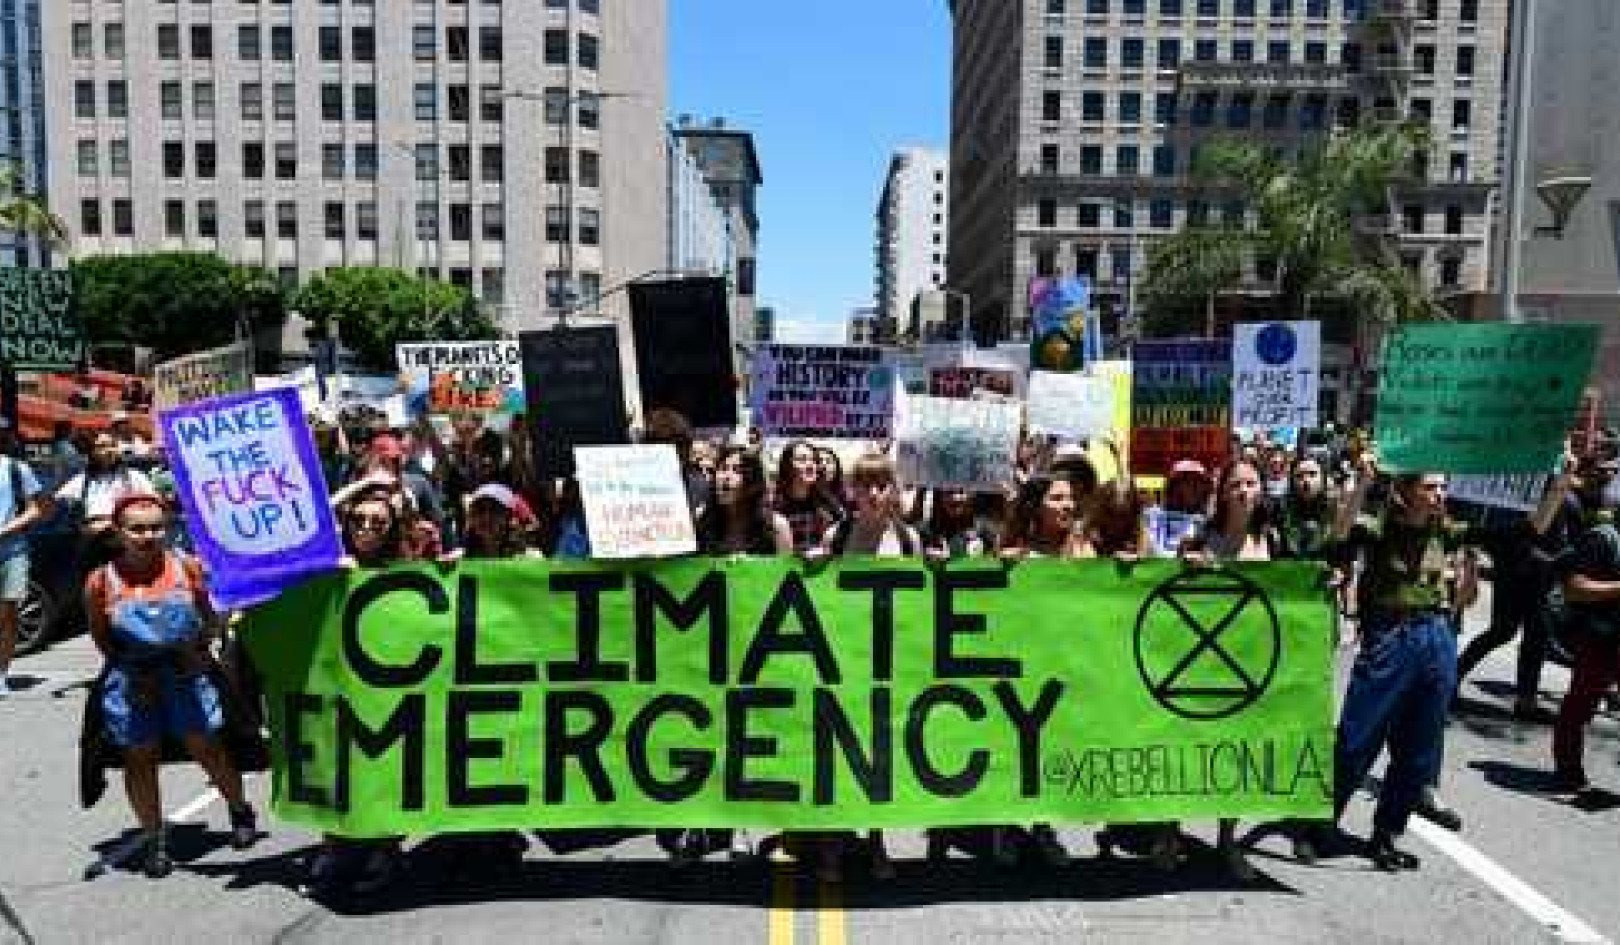 7,000+ Colleges and Universities Declare Climate Emergency and Unveil Three-Point Plan to Combat It